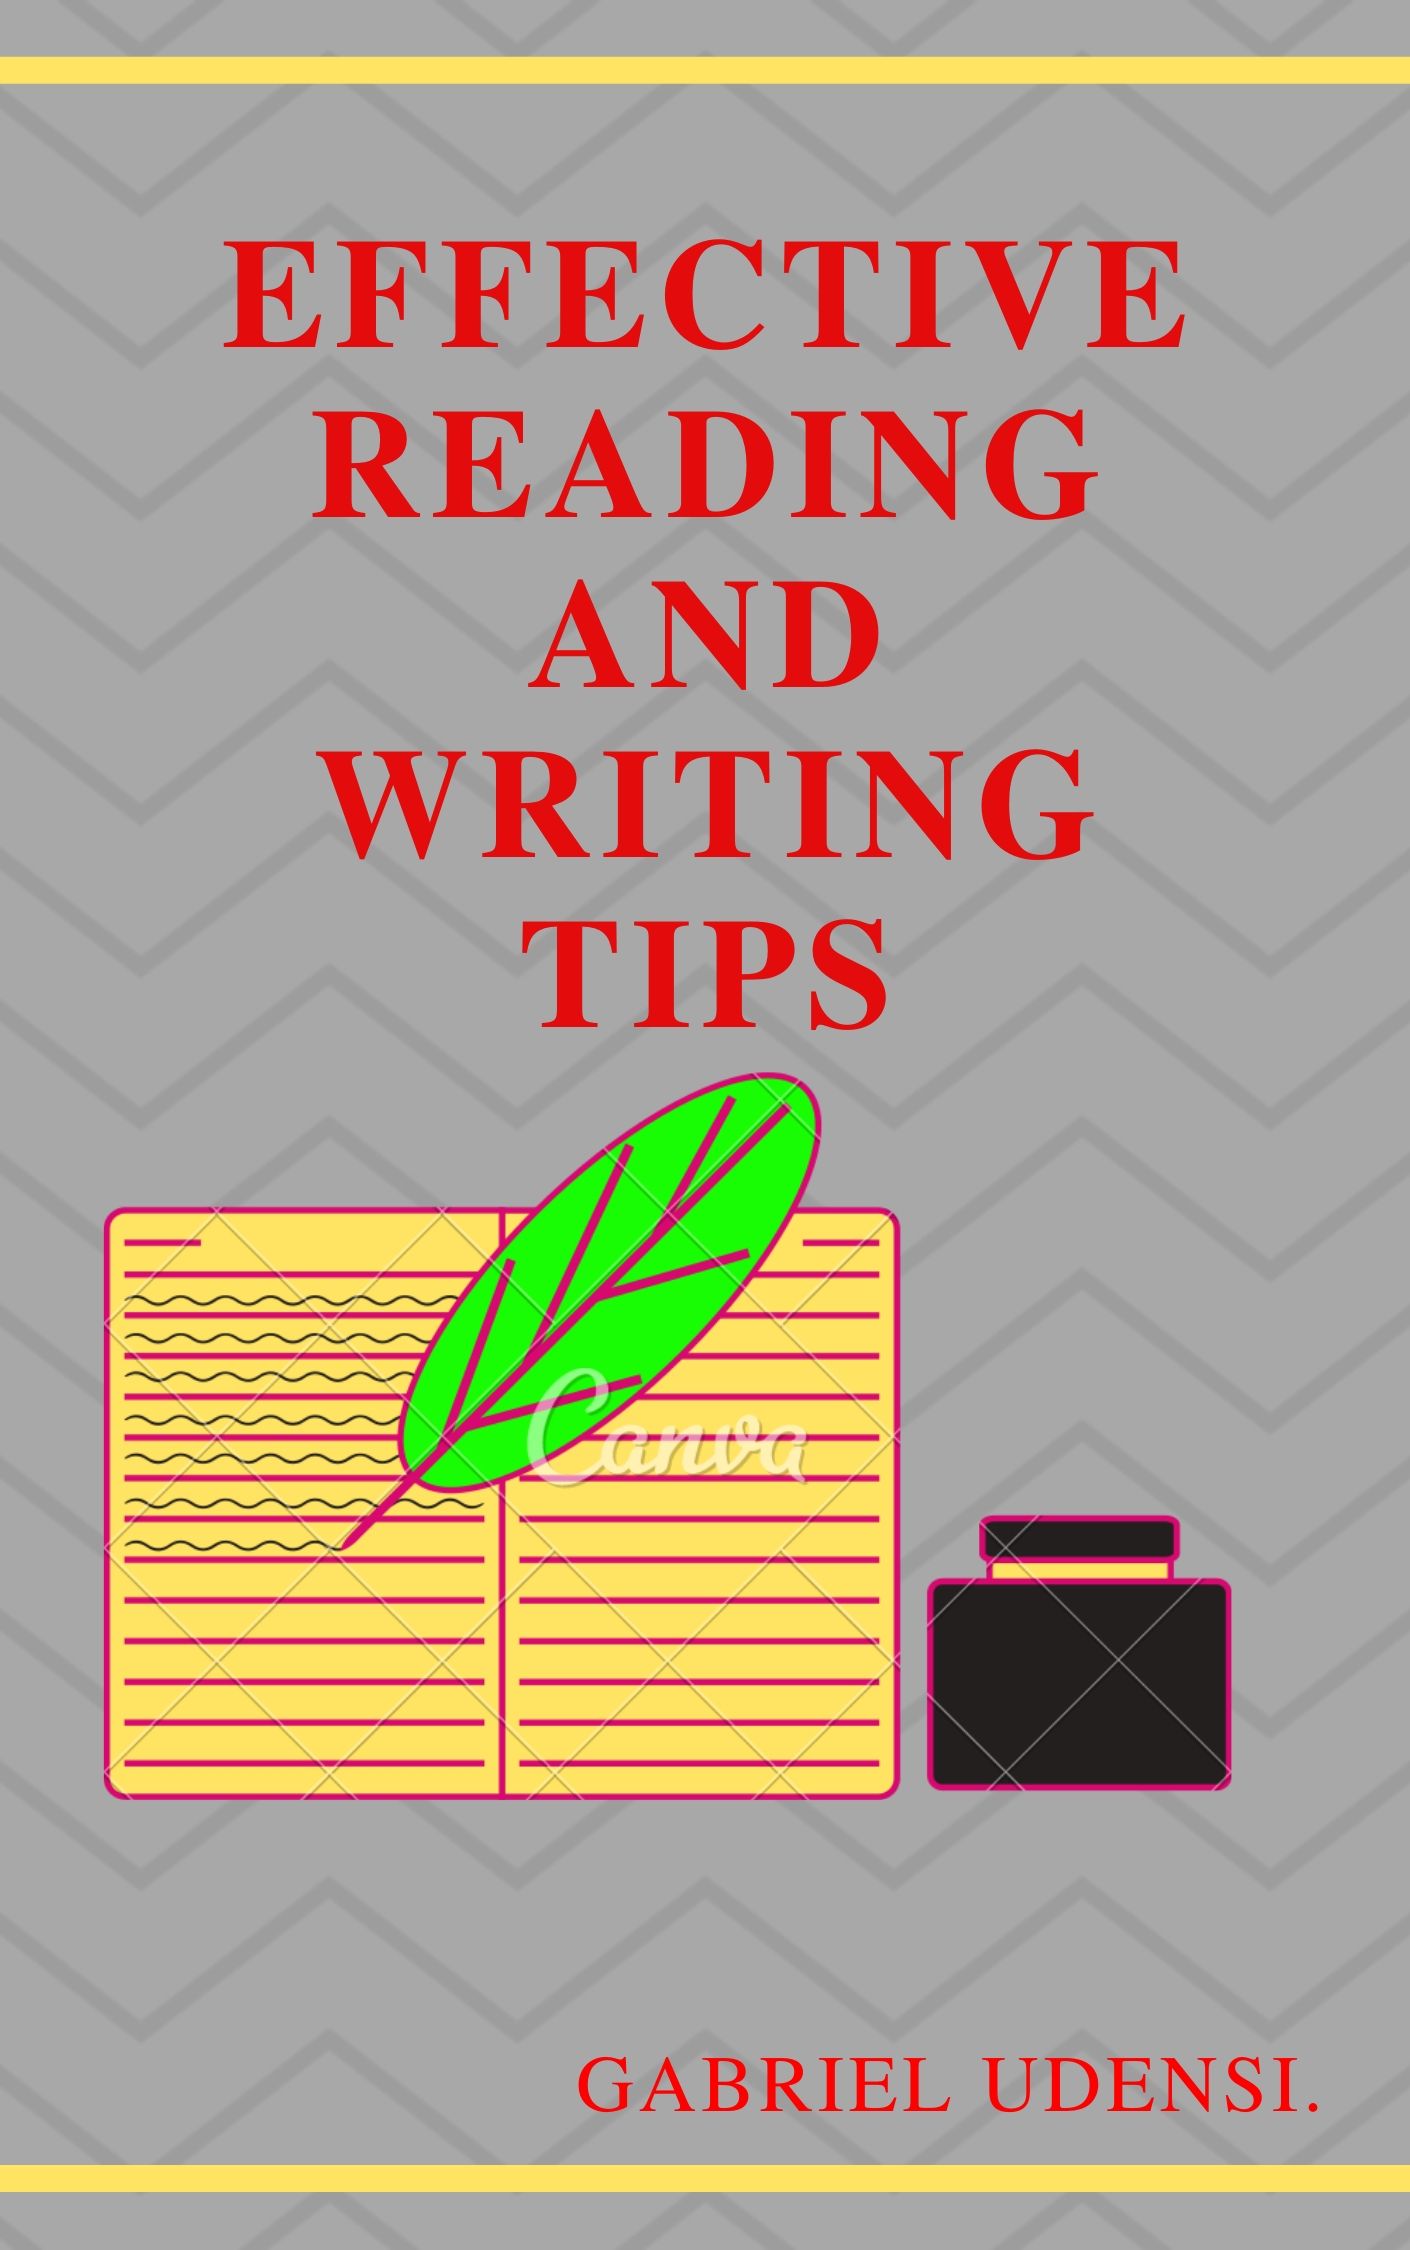 Effective-Reading-and-Writing-Tips